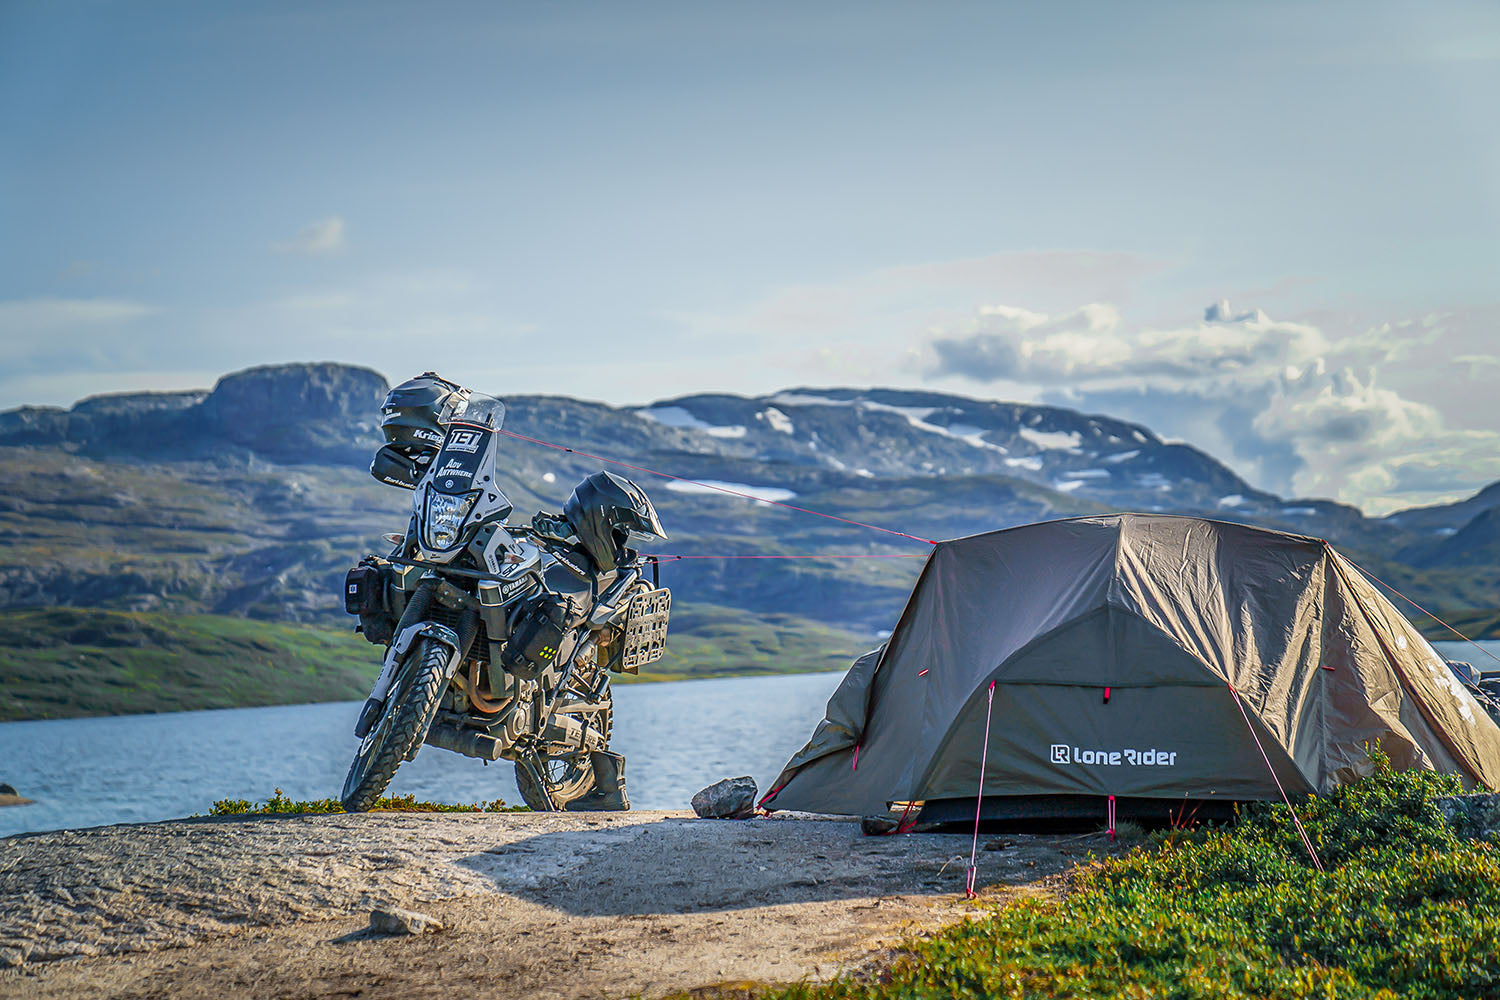 NORWAY CAMPING TWO-UP ON A MOTORCYCLE